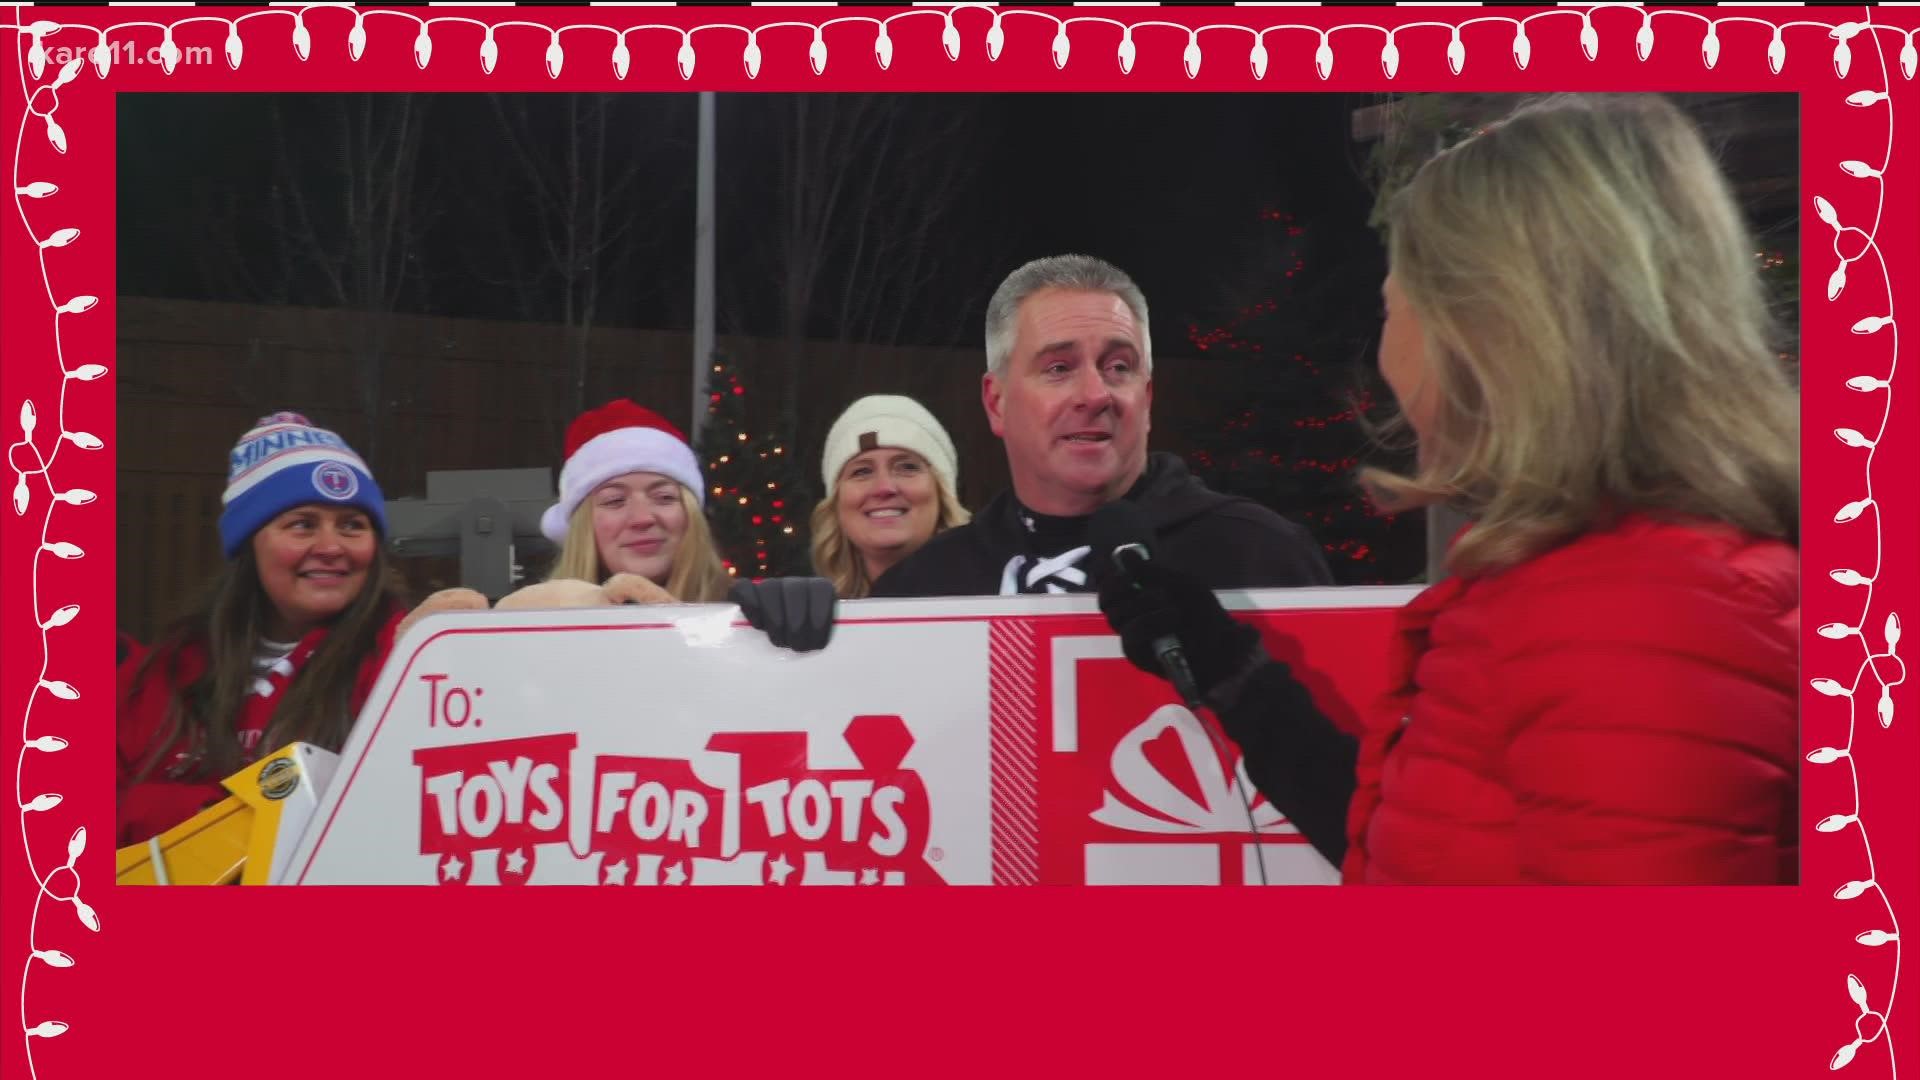 Thanks to everyone who's donating to the Toys for Tots campaign in 2021! 

Find out more about how you can help at http://www.kare11.com/toysfortots.